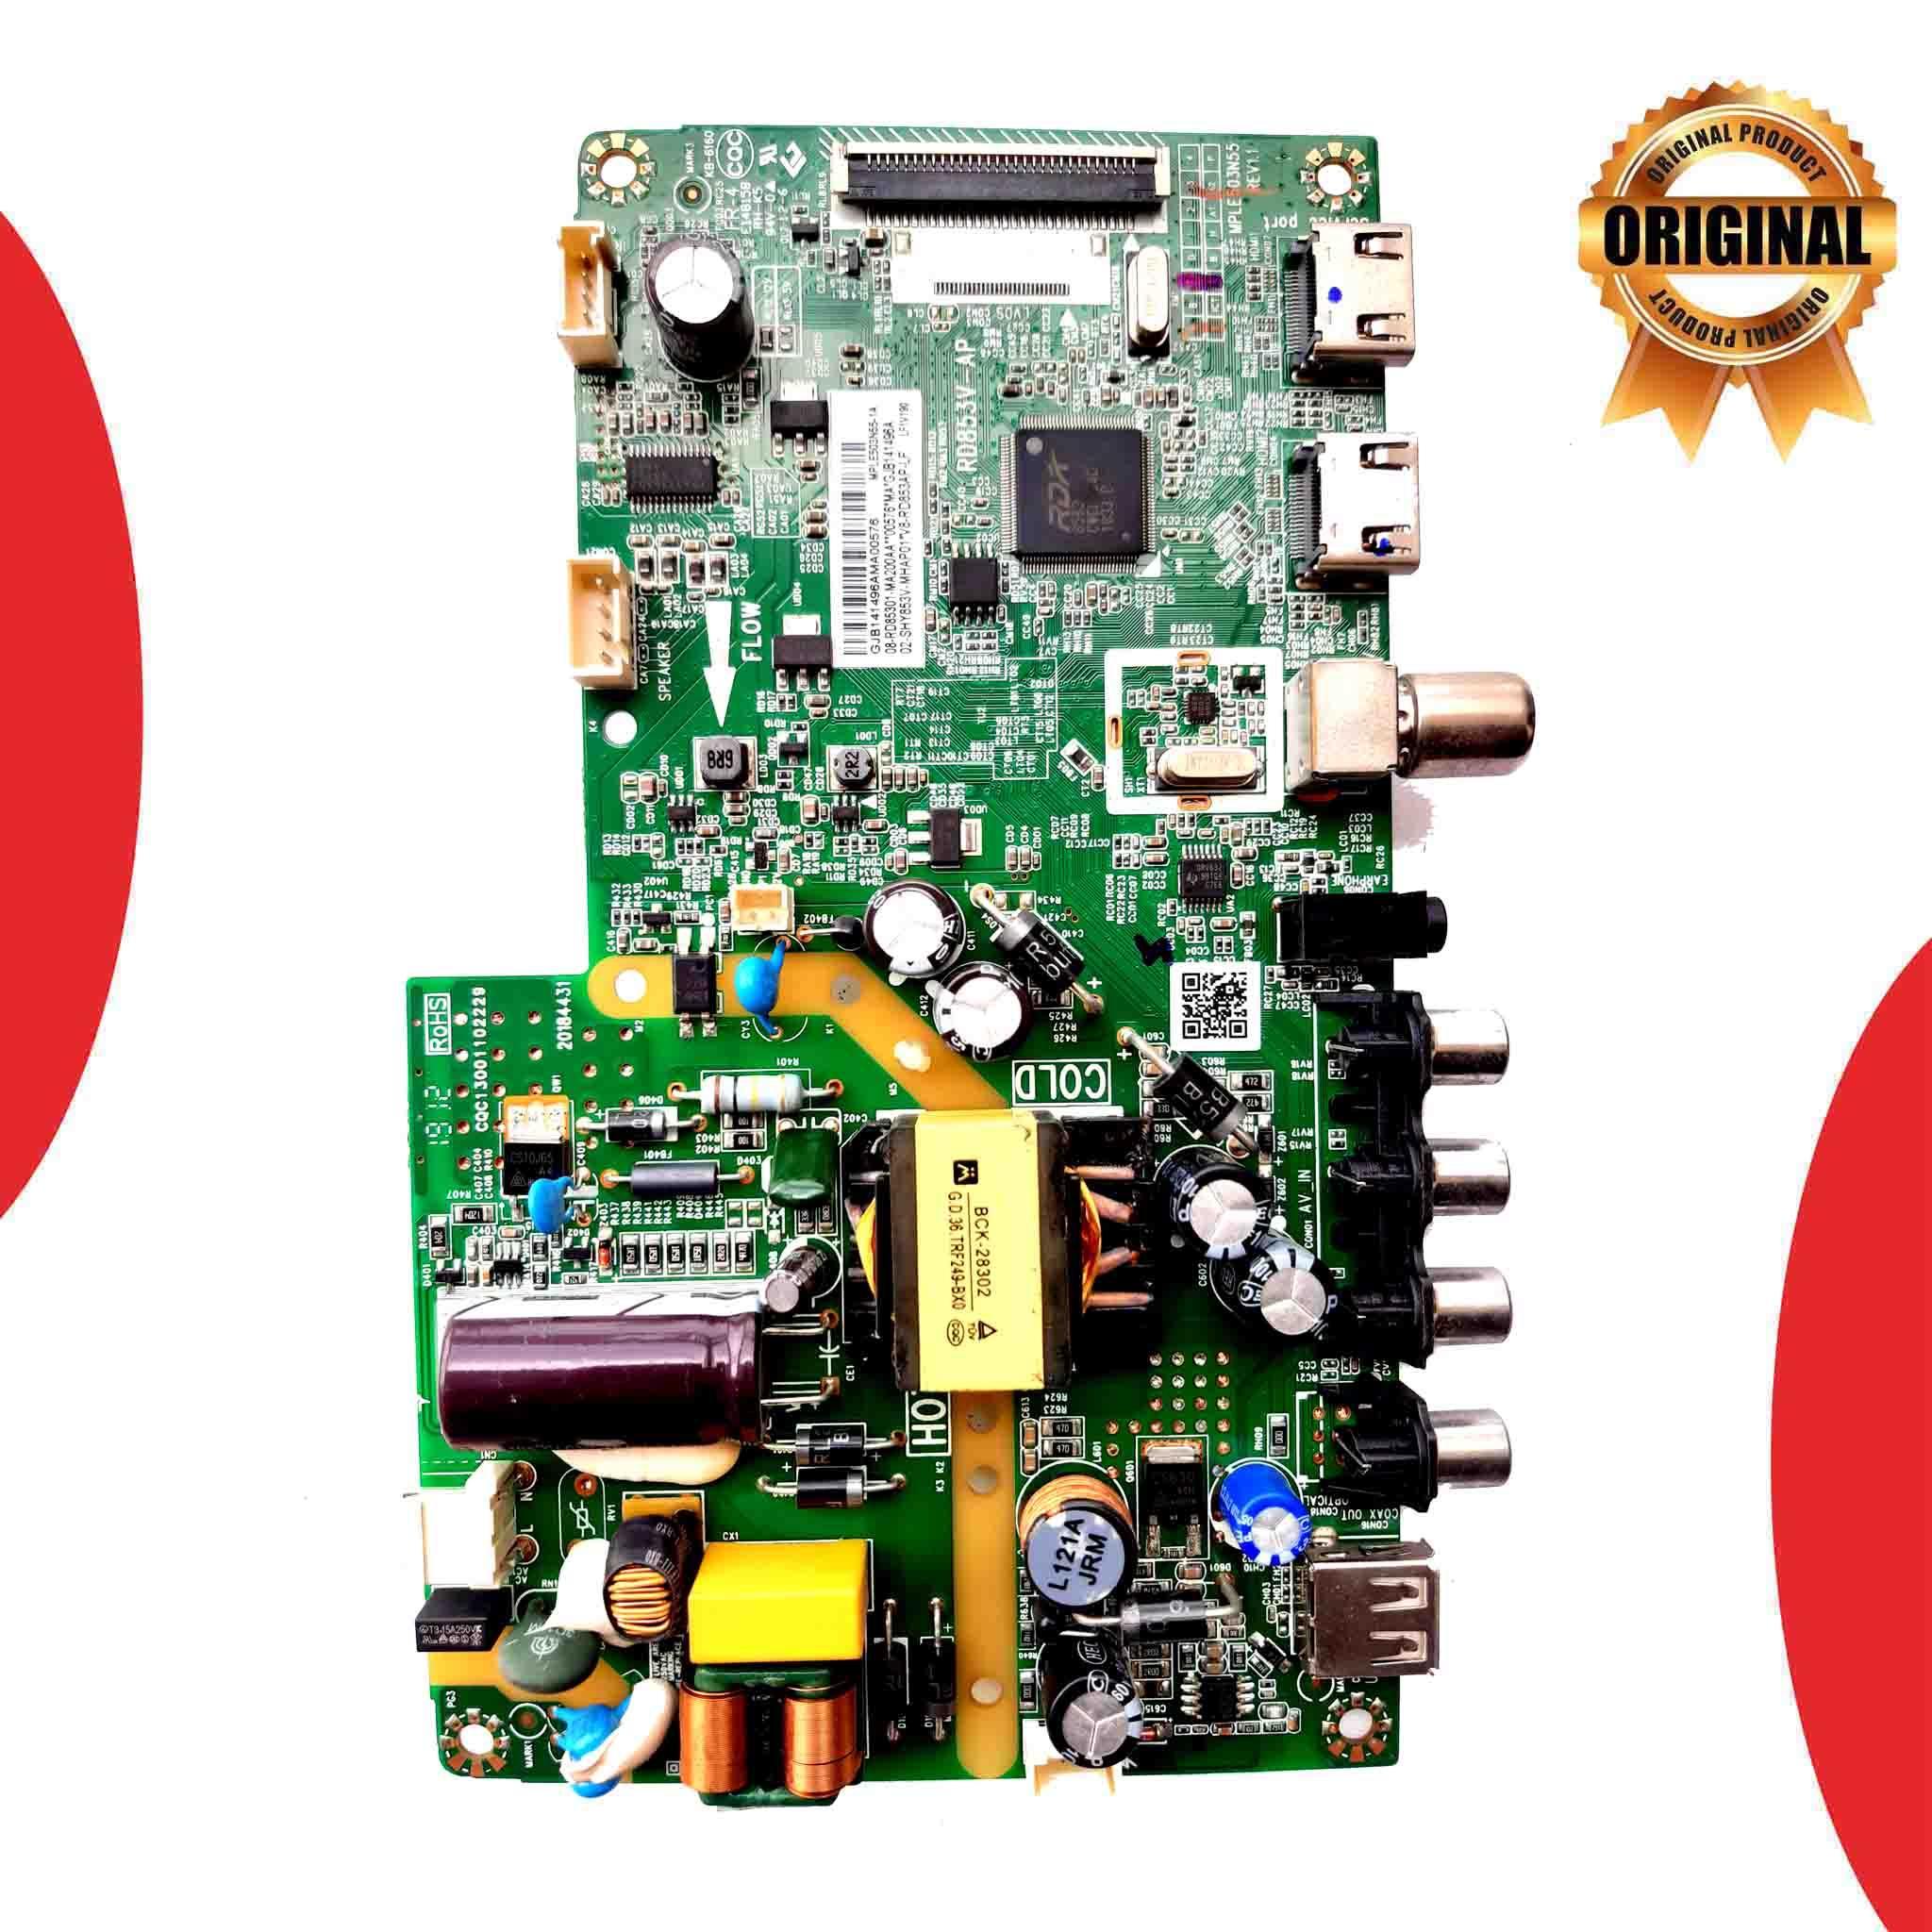 Model 32R300 TCL LED TV Motherboard - Great Bharat Electronics